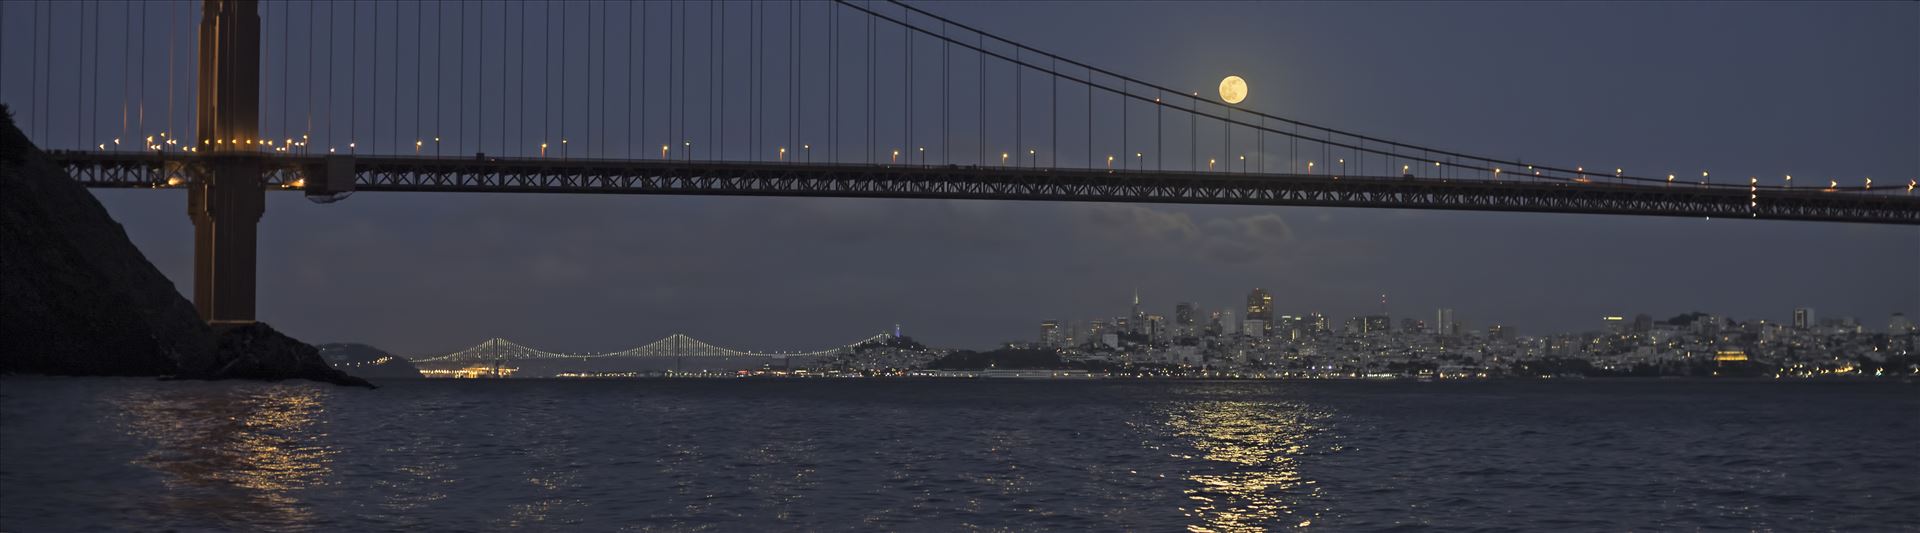 Moonrise Over the City Moonrise over the Golden Gate Bridge by Denise Buckley Crawford